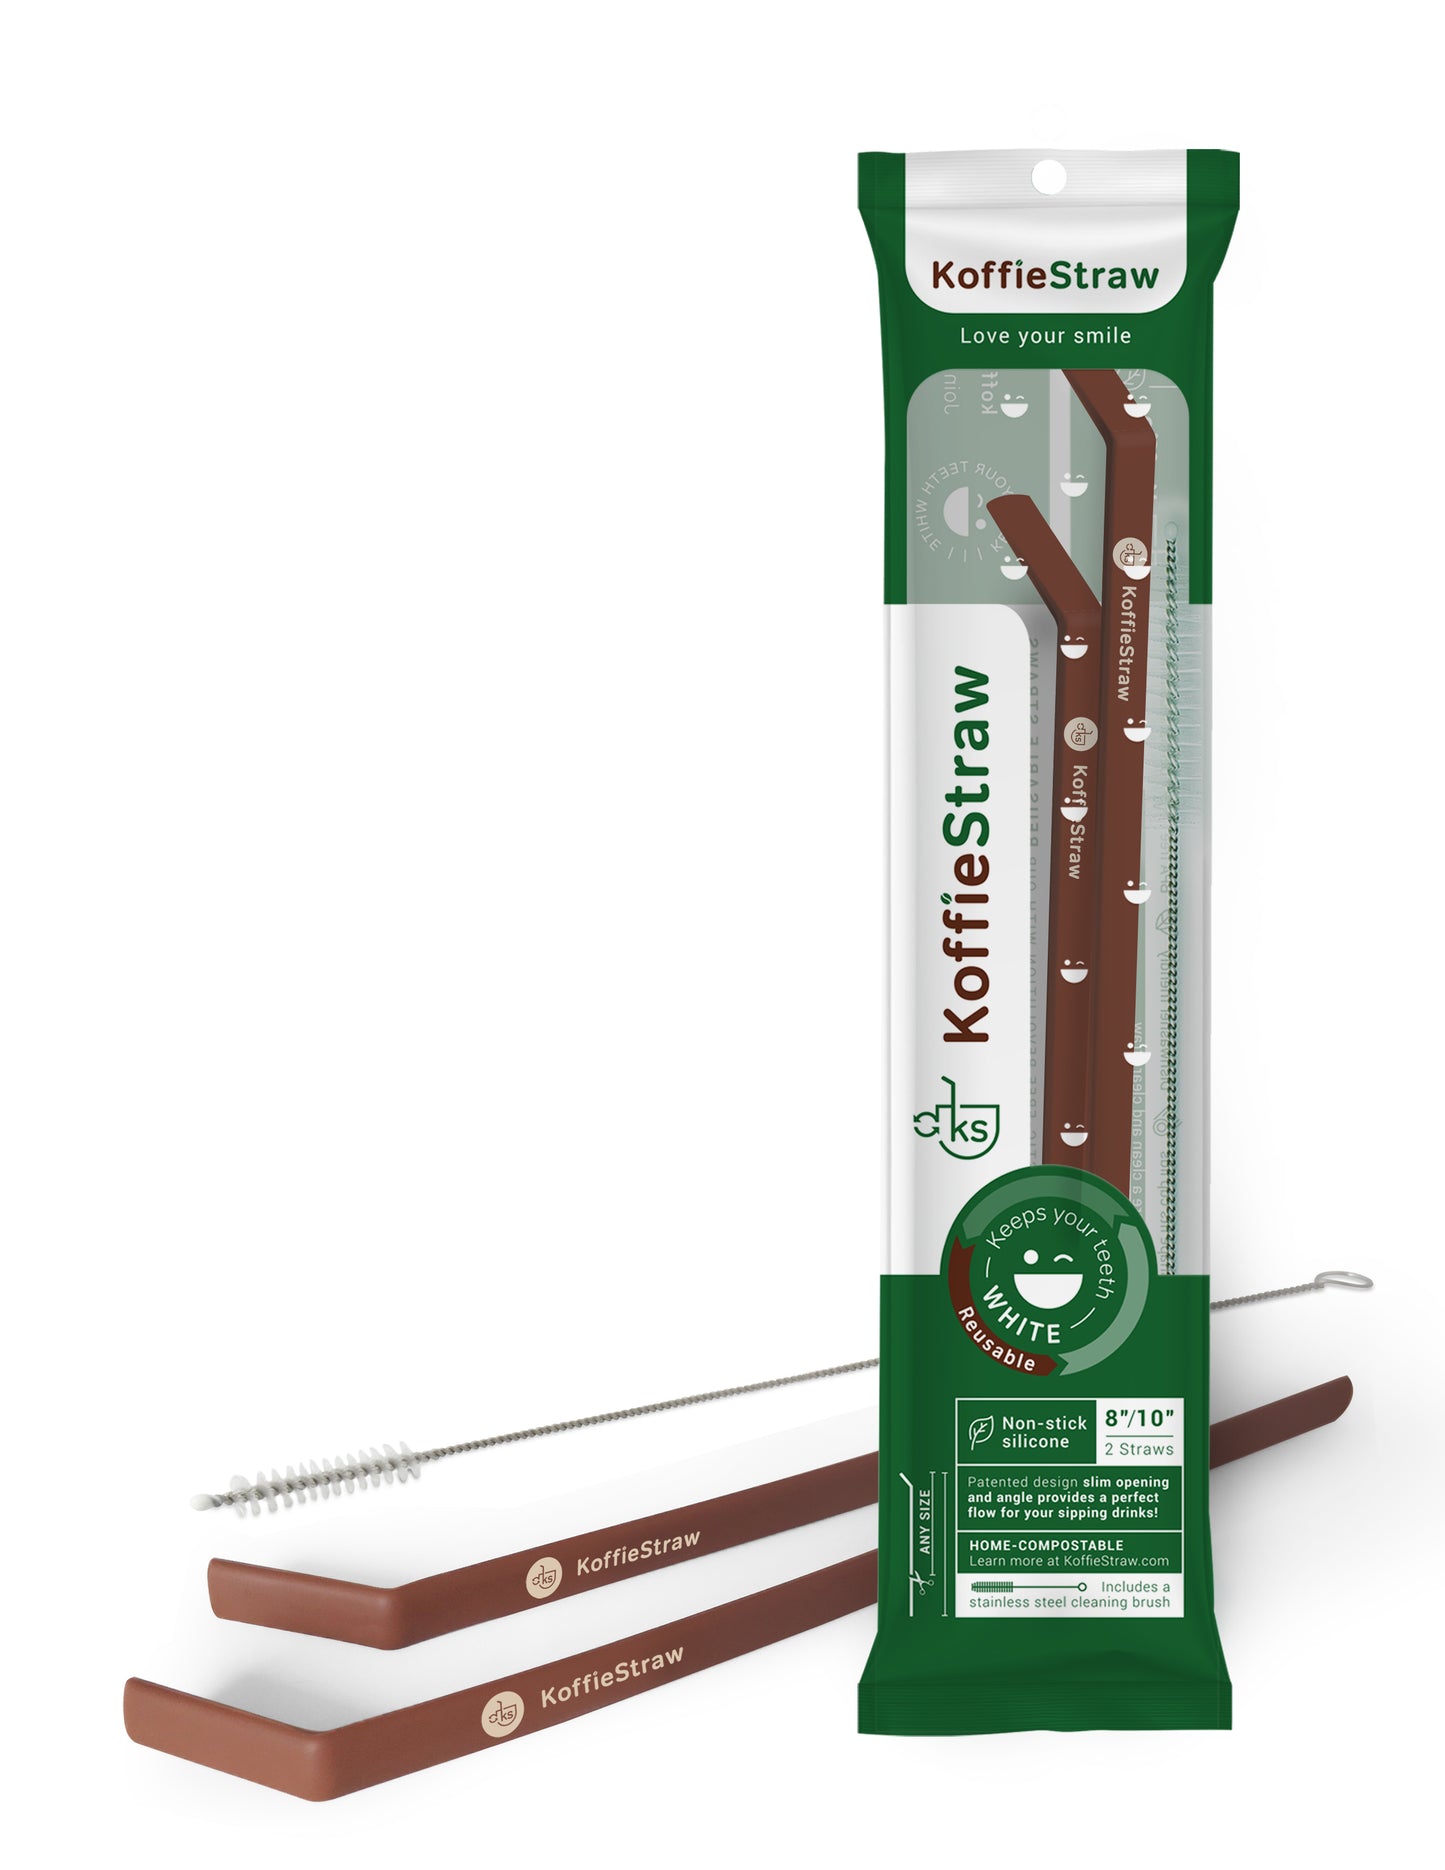 2-Pack of KoffieStraw: Mocha 10" + Mocha 8" with a stainless steeling cleaning brush in home-compostable packaging